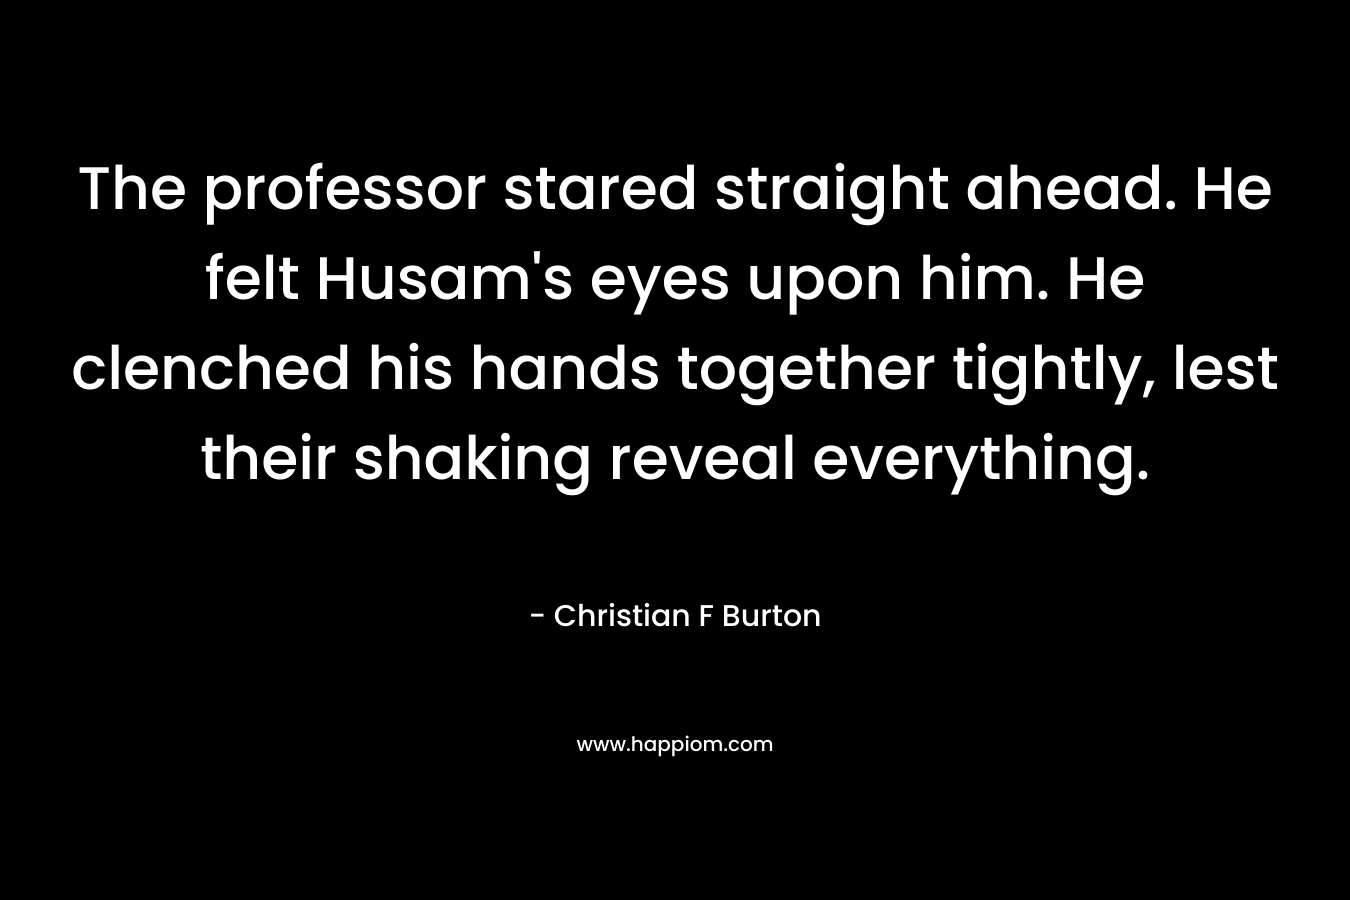 The professor stared straight ahead. He felt Husam’s eyes upon him. He clenched his hands together tightly, lest their shaking reveal everything. – Christian F Burton